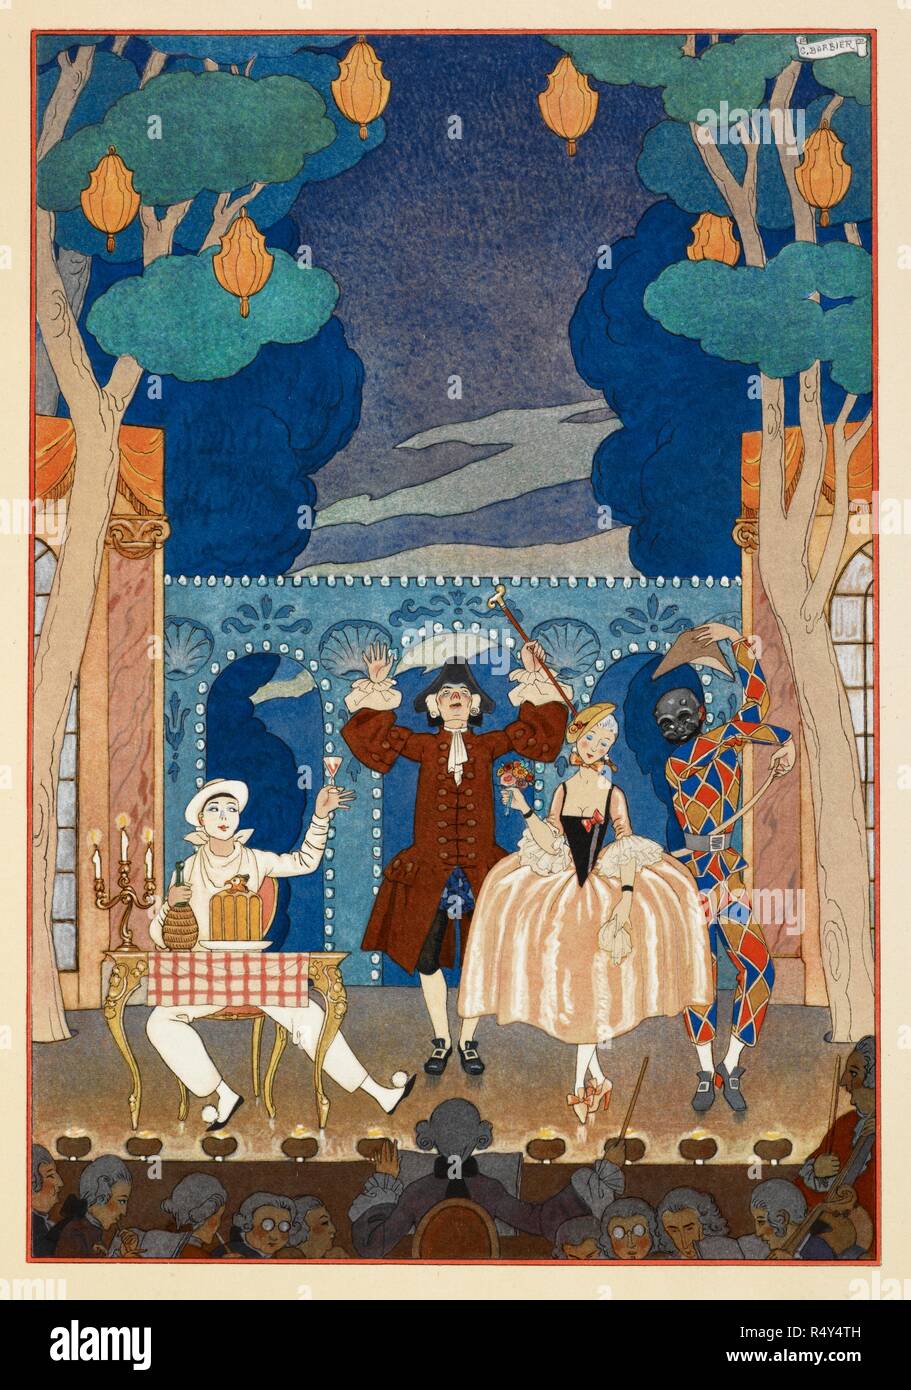 Pantomine. Pierrot and Harlequin. A man and pretty woman. All on a stage. FÃªtes galantes. [PoÃ¨mes]. Illustrations de George Barbier. Paris: H. Piazza, 1928. FÃªtes Galantes is an album consisting of romantic prints of French life among the upper classes of the 19th century. Rich aristocrats of the French court used to play gallant scenes from the commedia dellâ€™ arte that were called Fetes Galantes. The prints accompany Paul Verlaine's poetry. Each album contains 20 lithograph prints with pochoir highlighting by George Barbier. Source: L.45/2847, before page 7. Language: French. Stock Photo